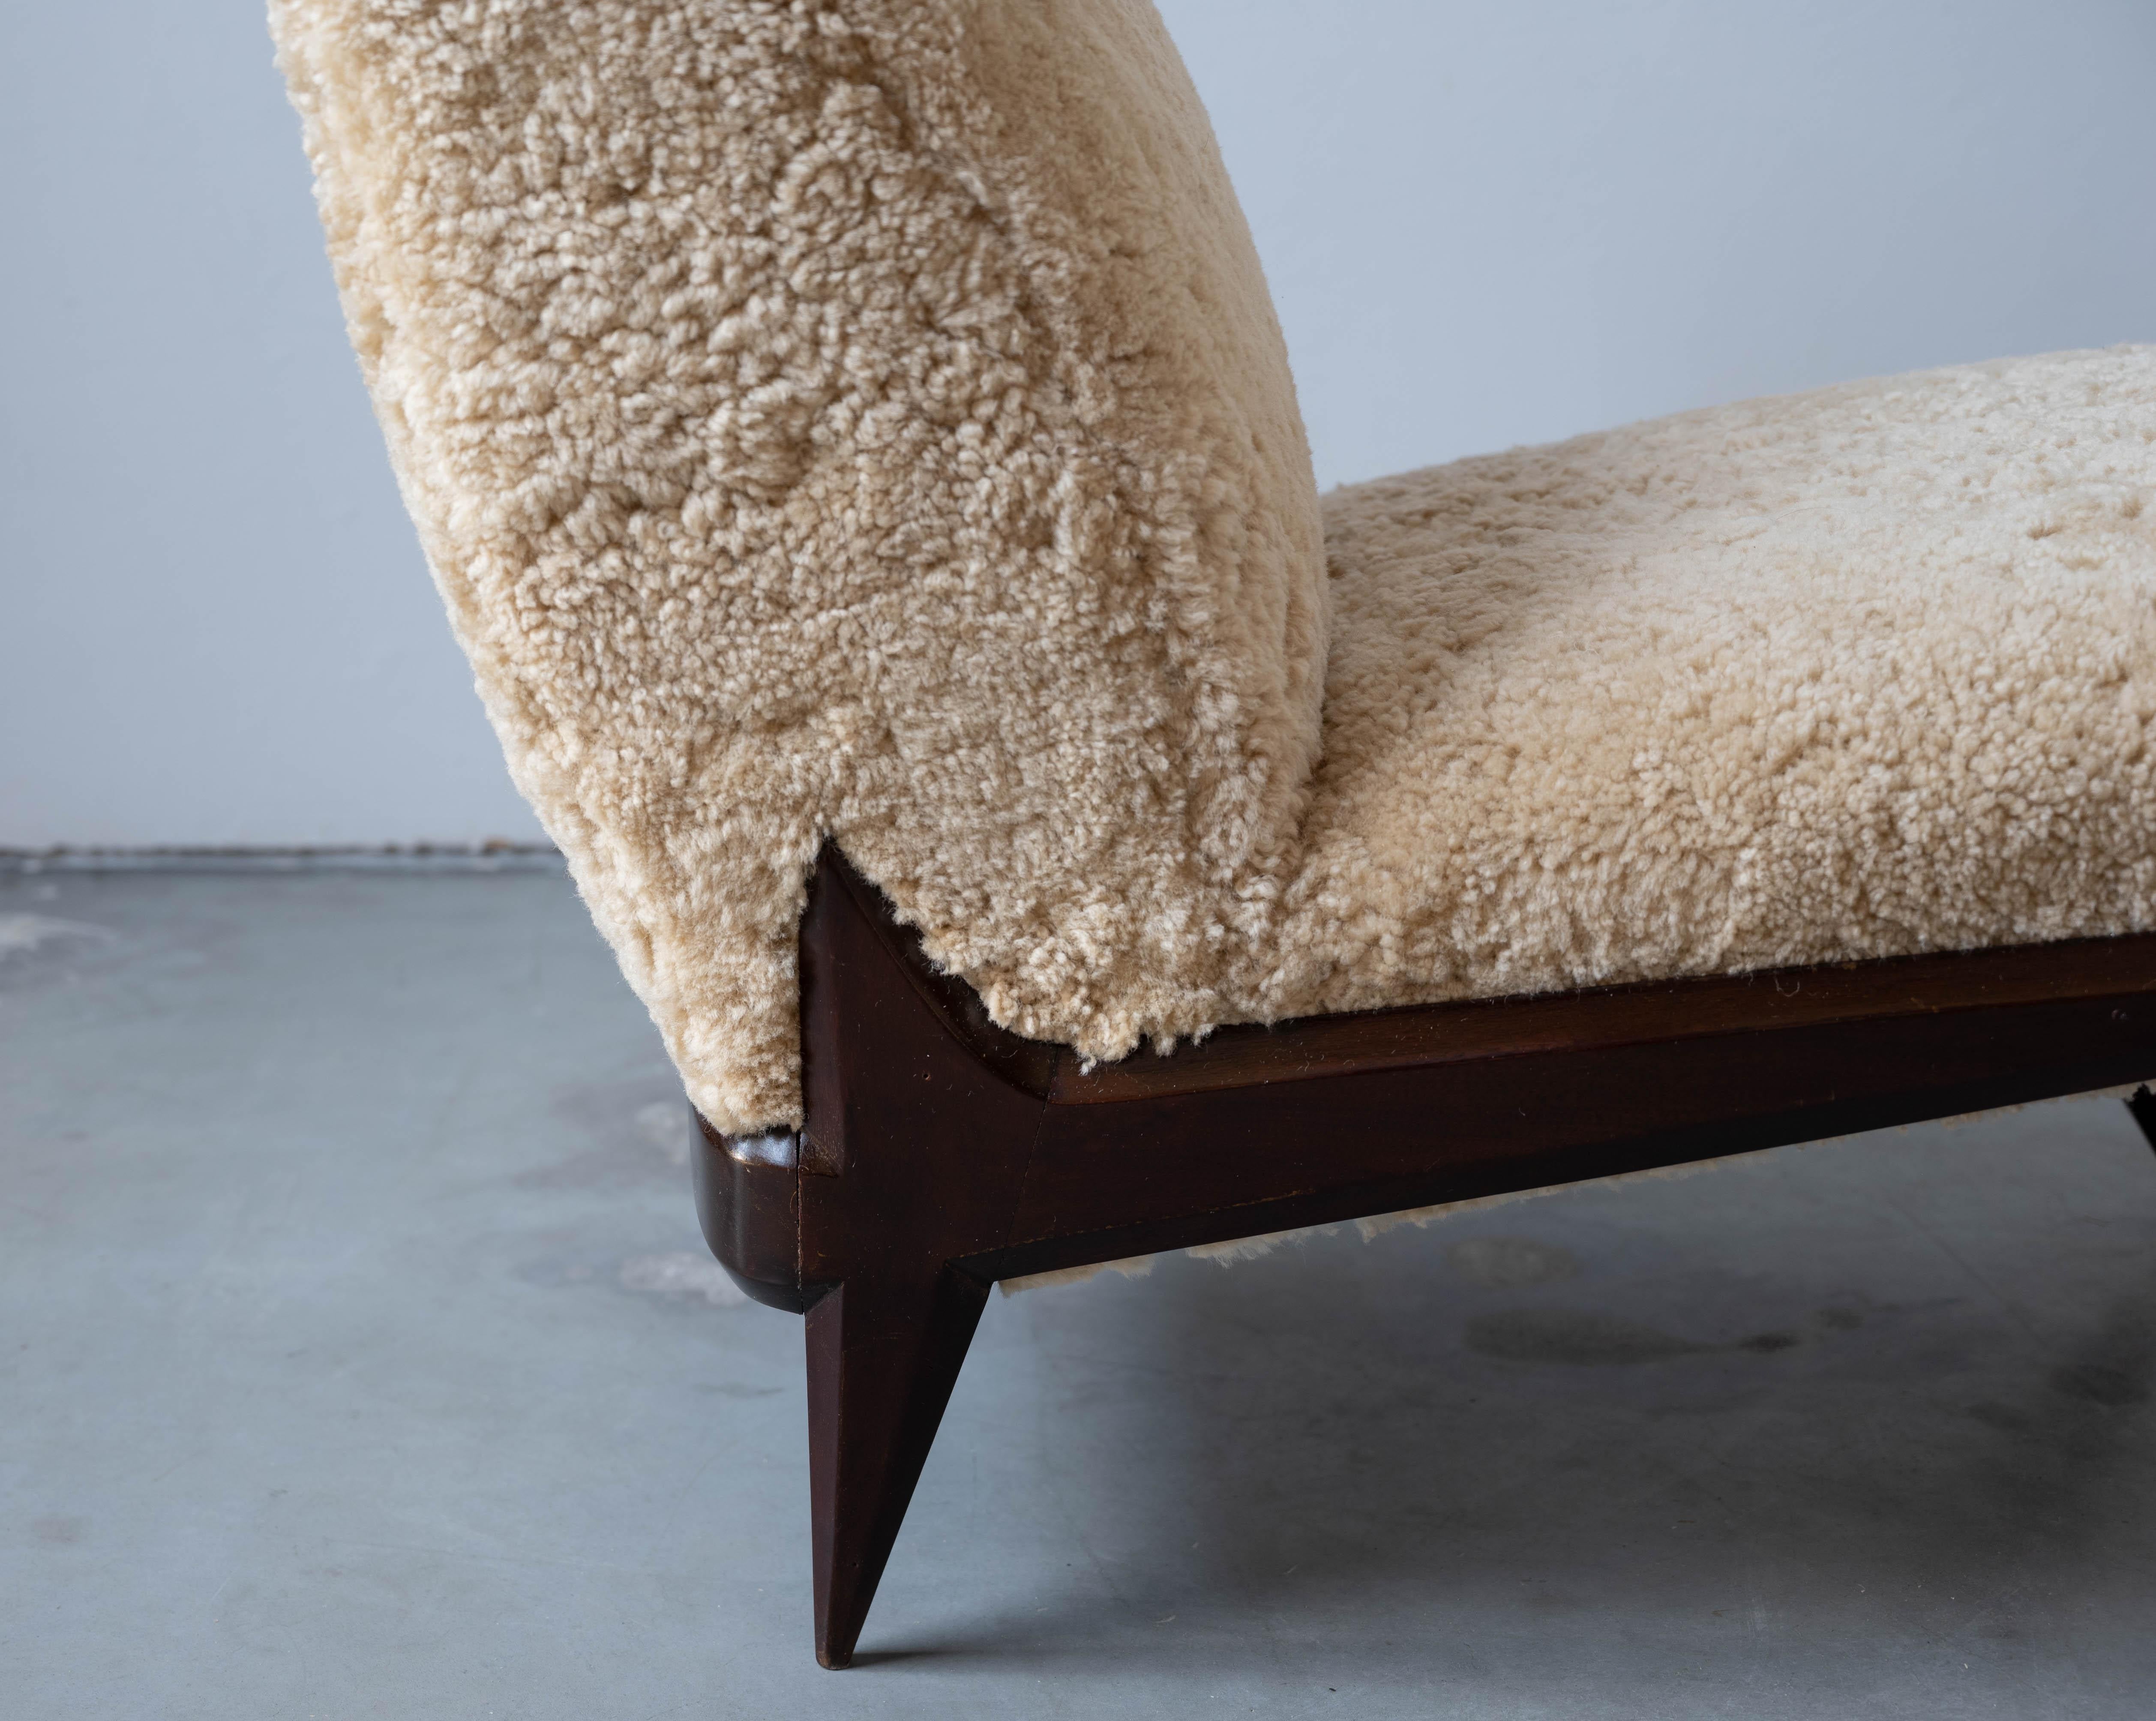 Sheepskin Ico Parisi 'Attribution' Slipper Chair, Dark-Stained Wood, Shearling Italy 1950s